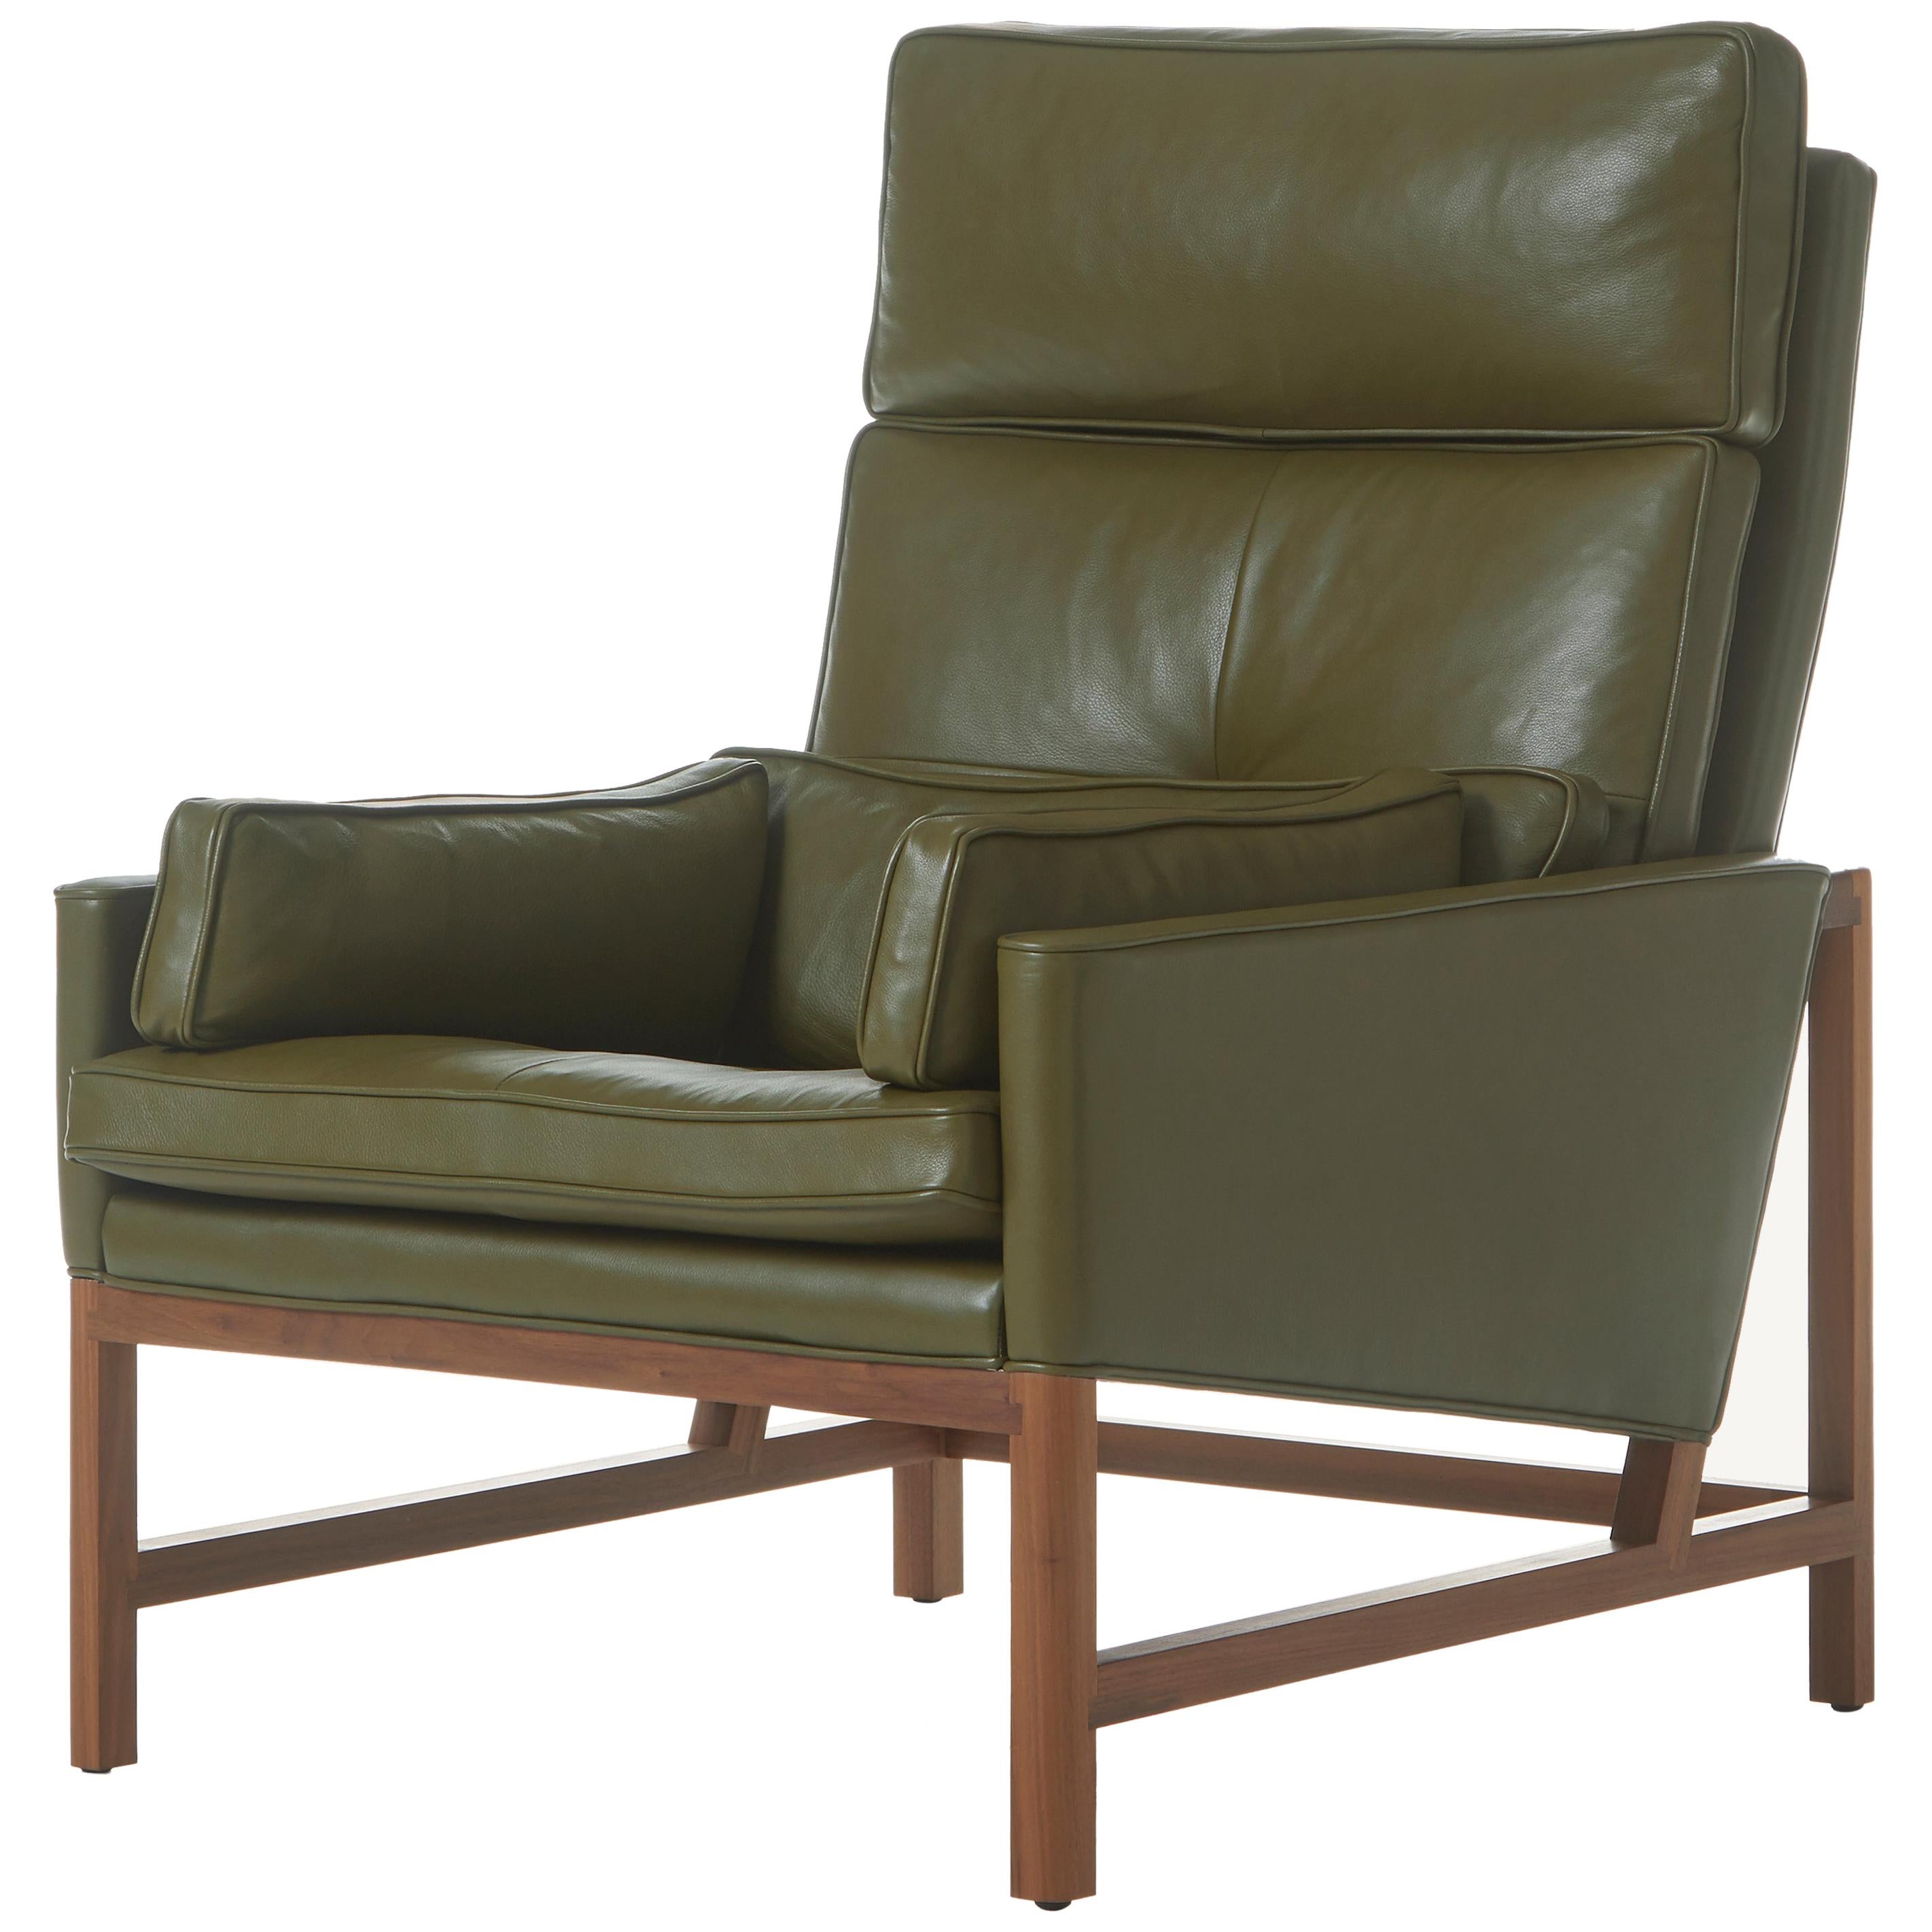 For Sale: Brown (Elegant 48027 Olive) Wood Frame High Back Lounge Chair in Walnut and Leather Designed by Craig Bassam